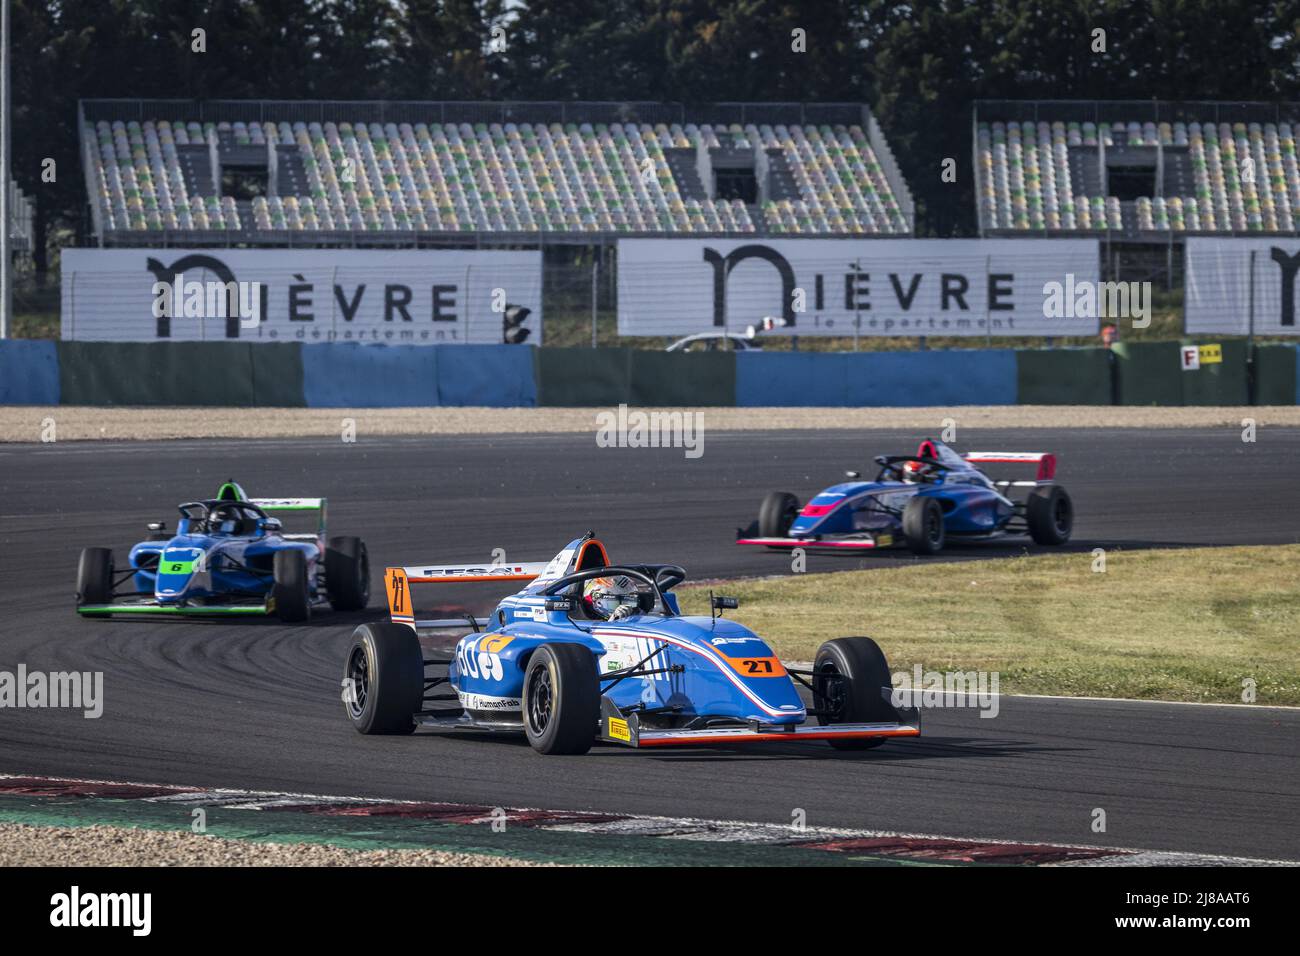 27 PIERRE Edgar (fra), Formule 4 - Mygale Genération 2, action during the 3rd round of the Championnat de France FFSA F4 2022, from May 13 to 15 on the Circuit de Nevers Magny-Cours in Magny-Cours, France - Photo Marc de Mattia / DPPI Stock Photo